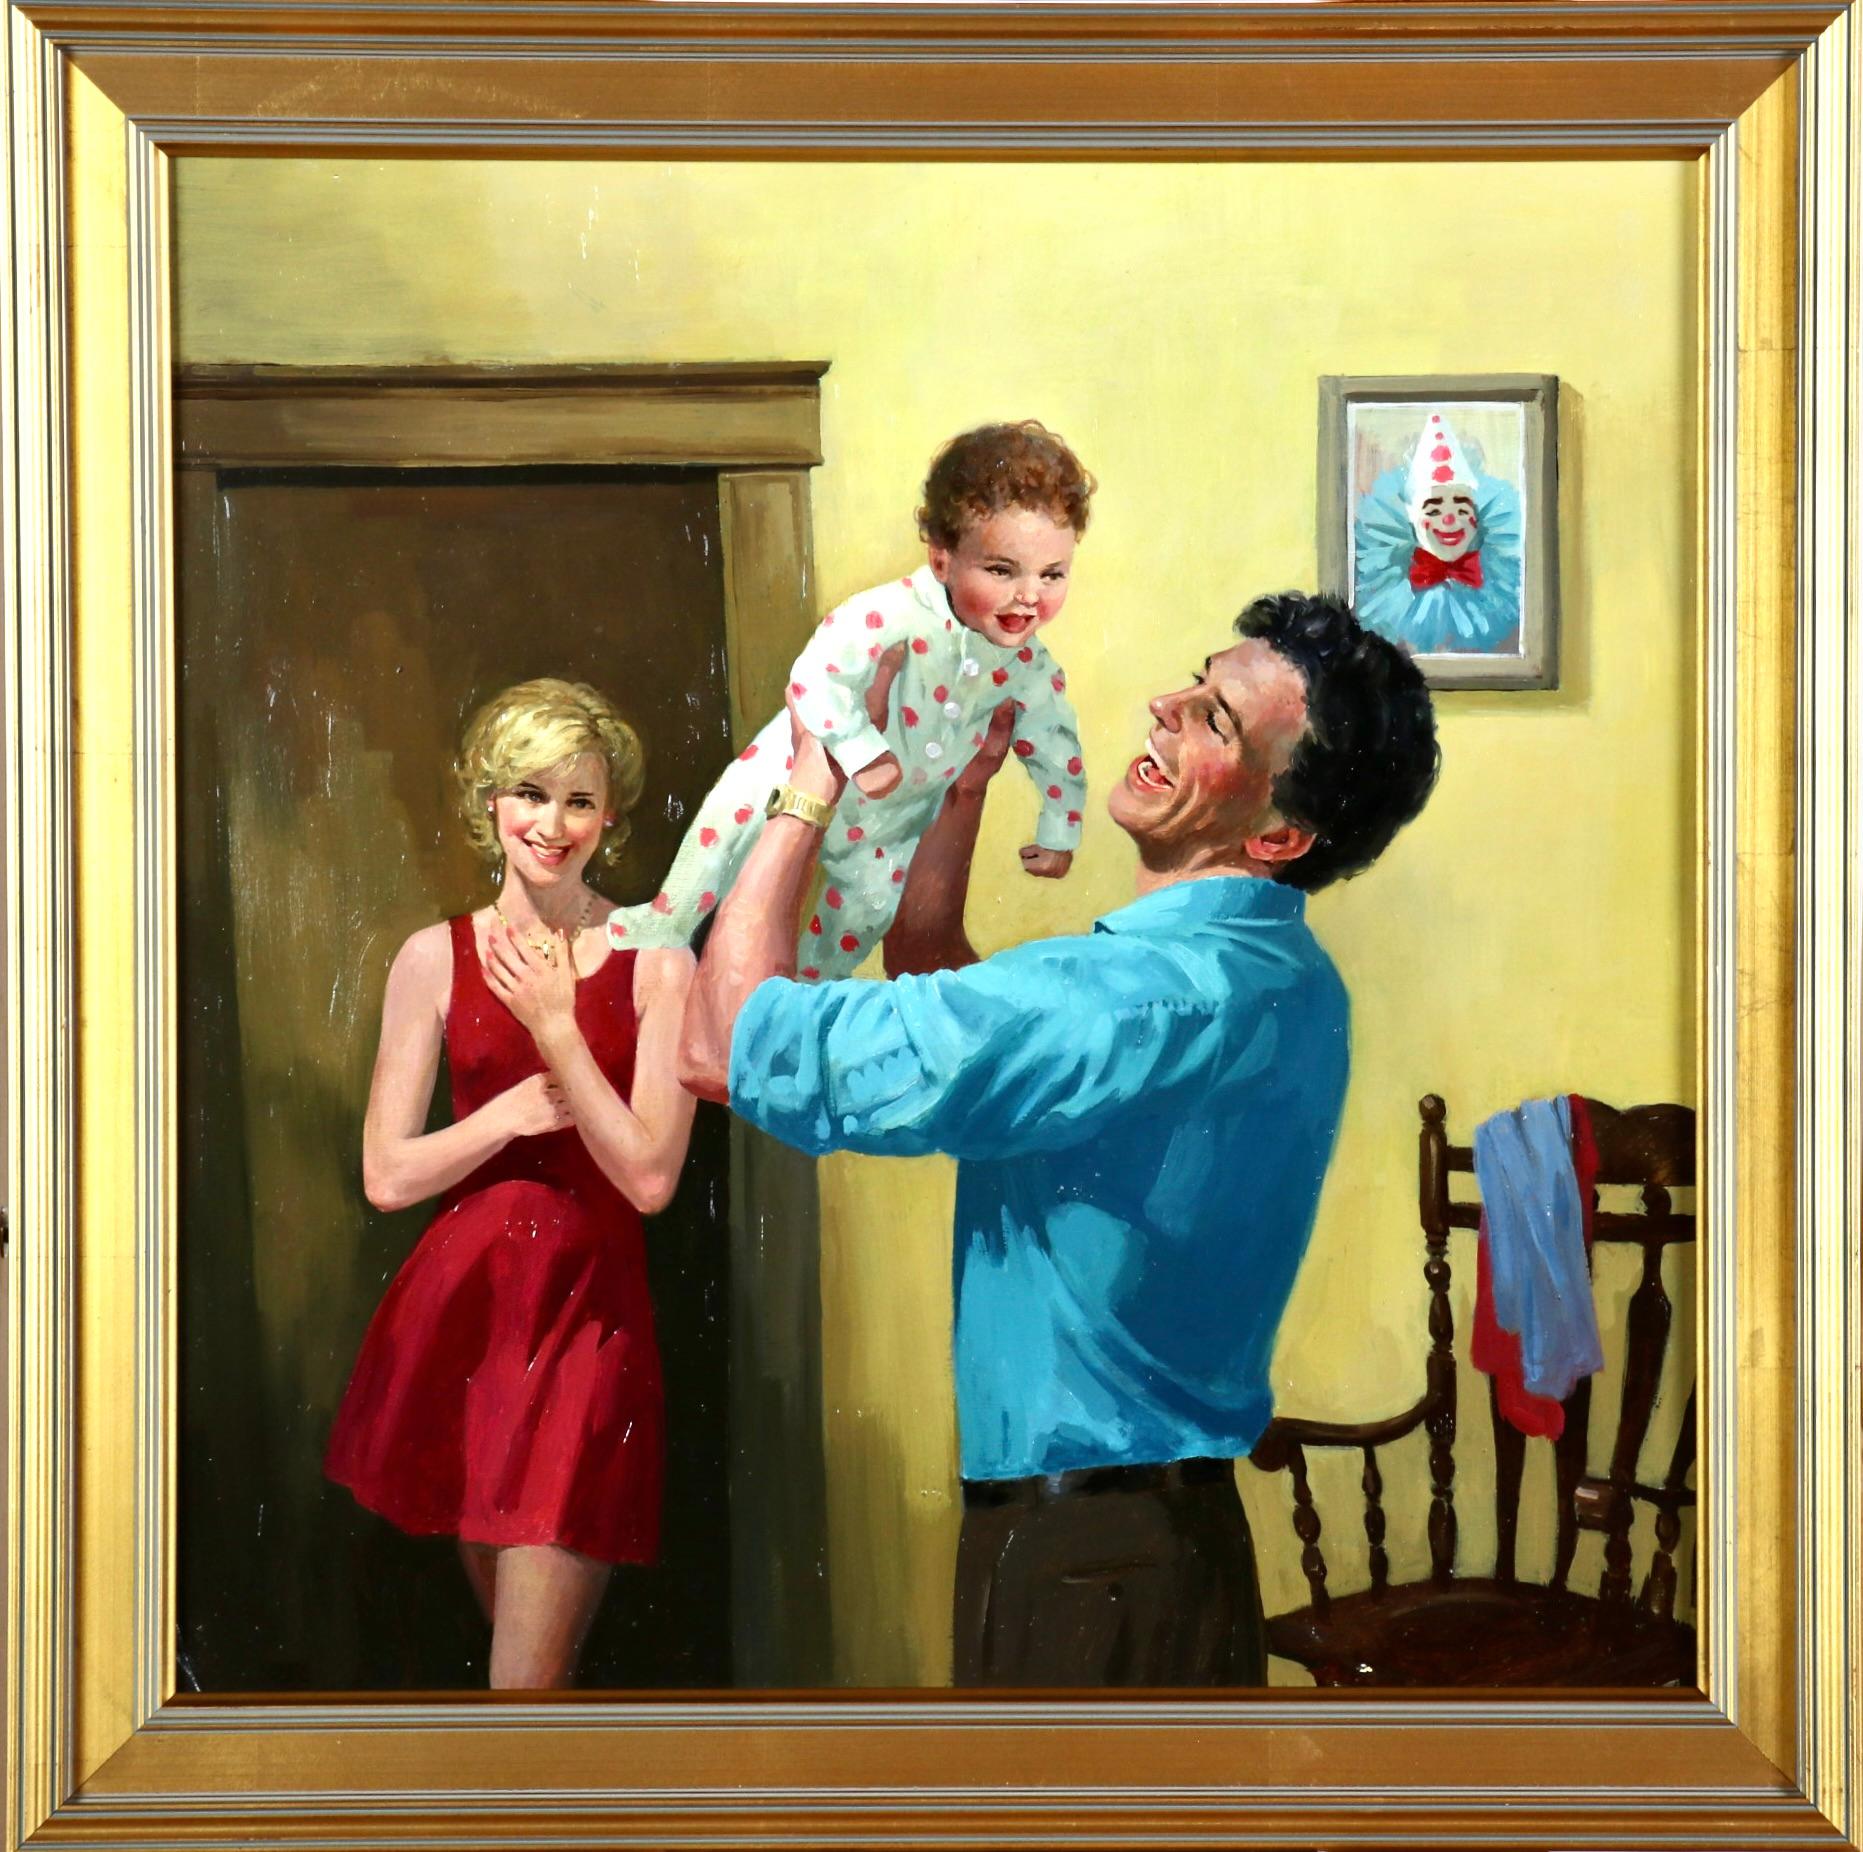 Temporary Father - Painting by Robert Maguire